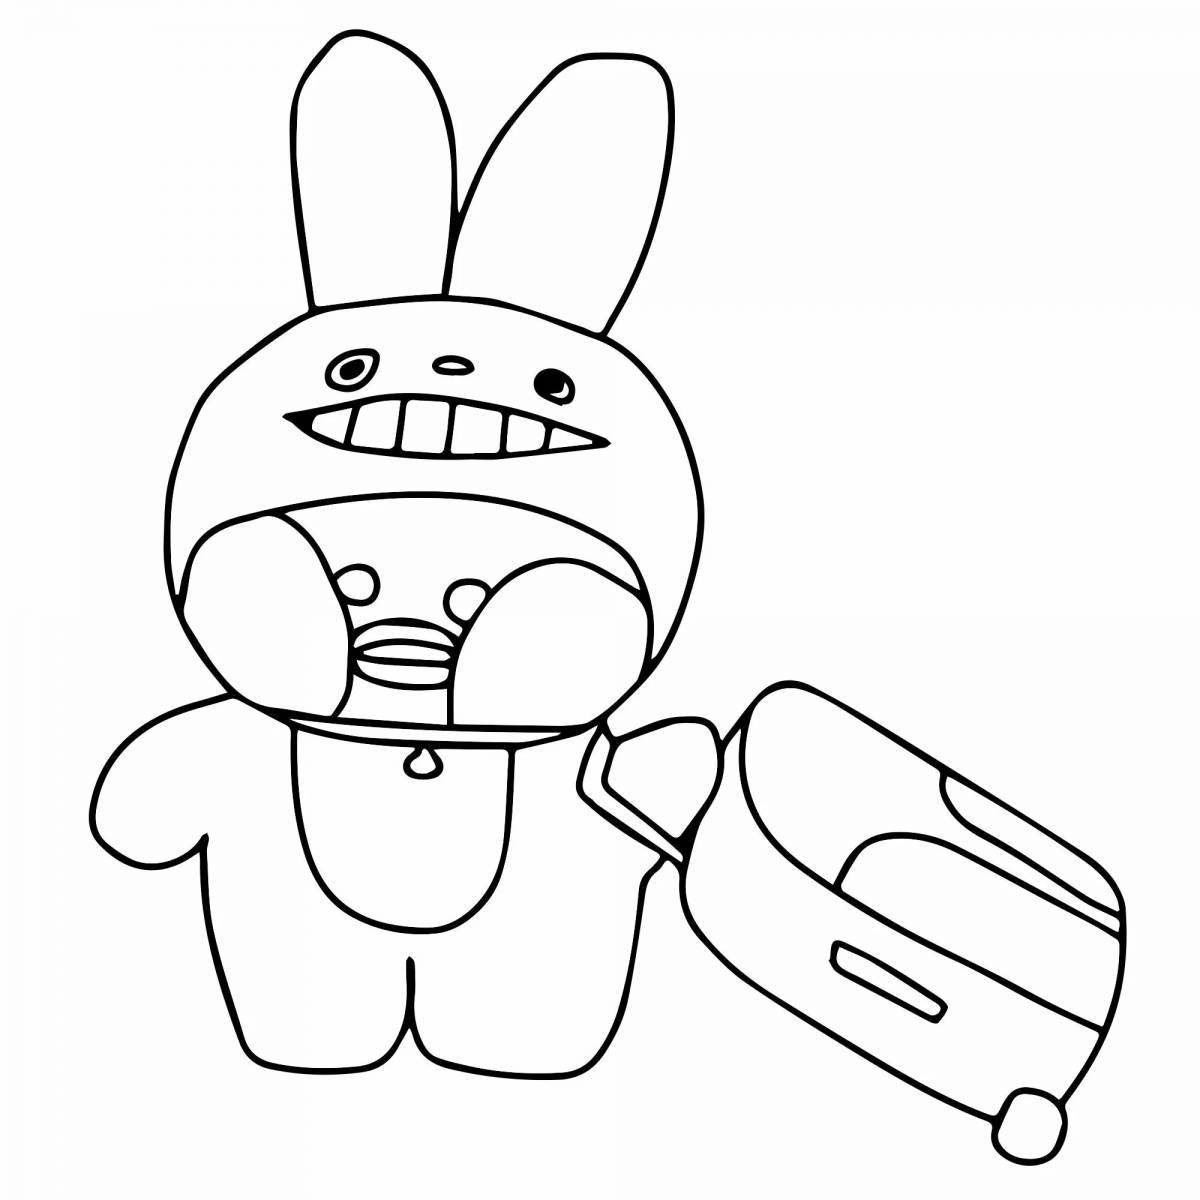 Amazing duck toy coloring page